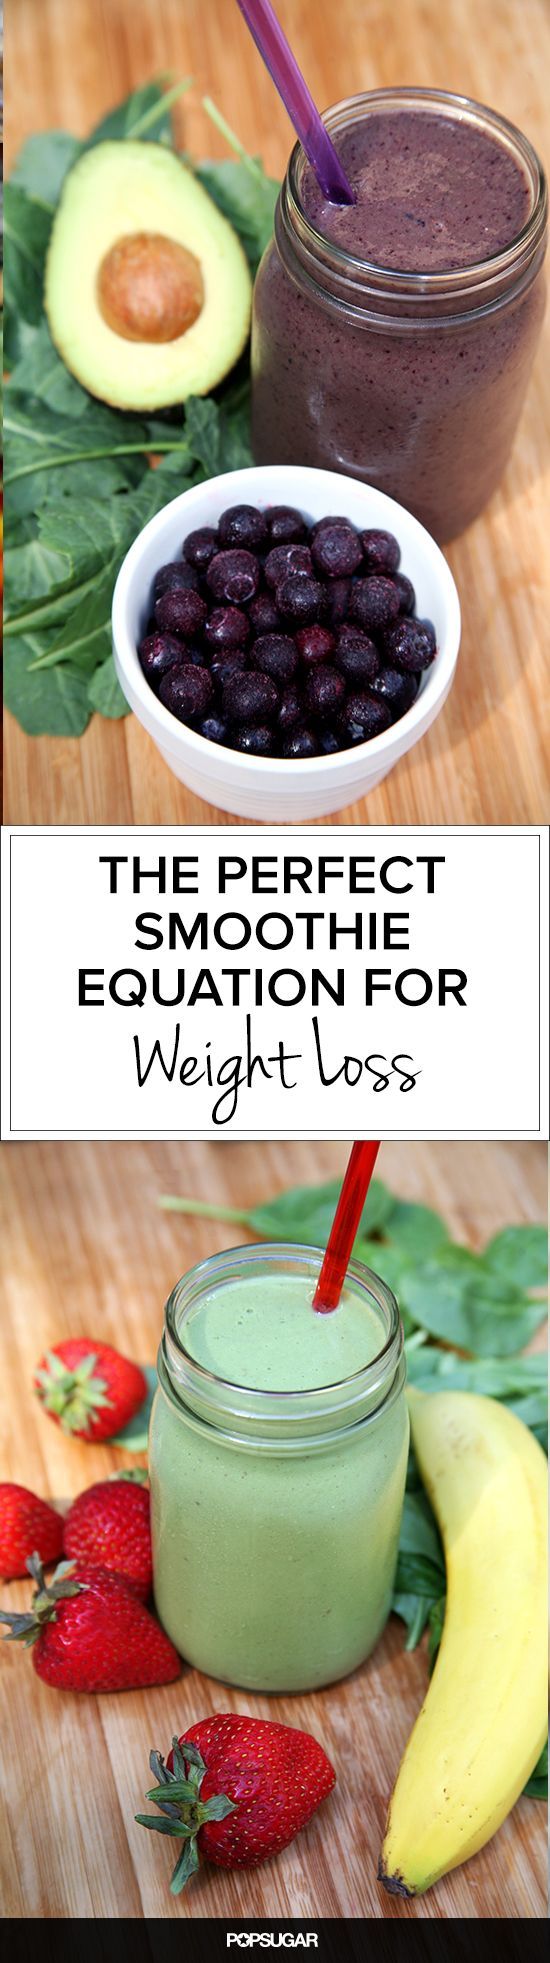 Nutritionists Reveal the Perfect Weight-Loss Smoothie; check out our 2 sample re